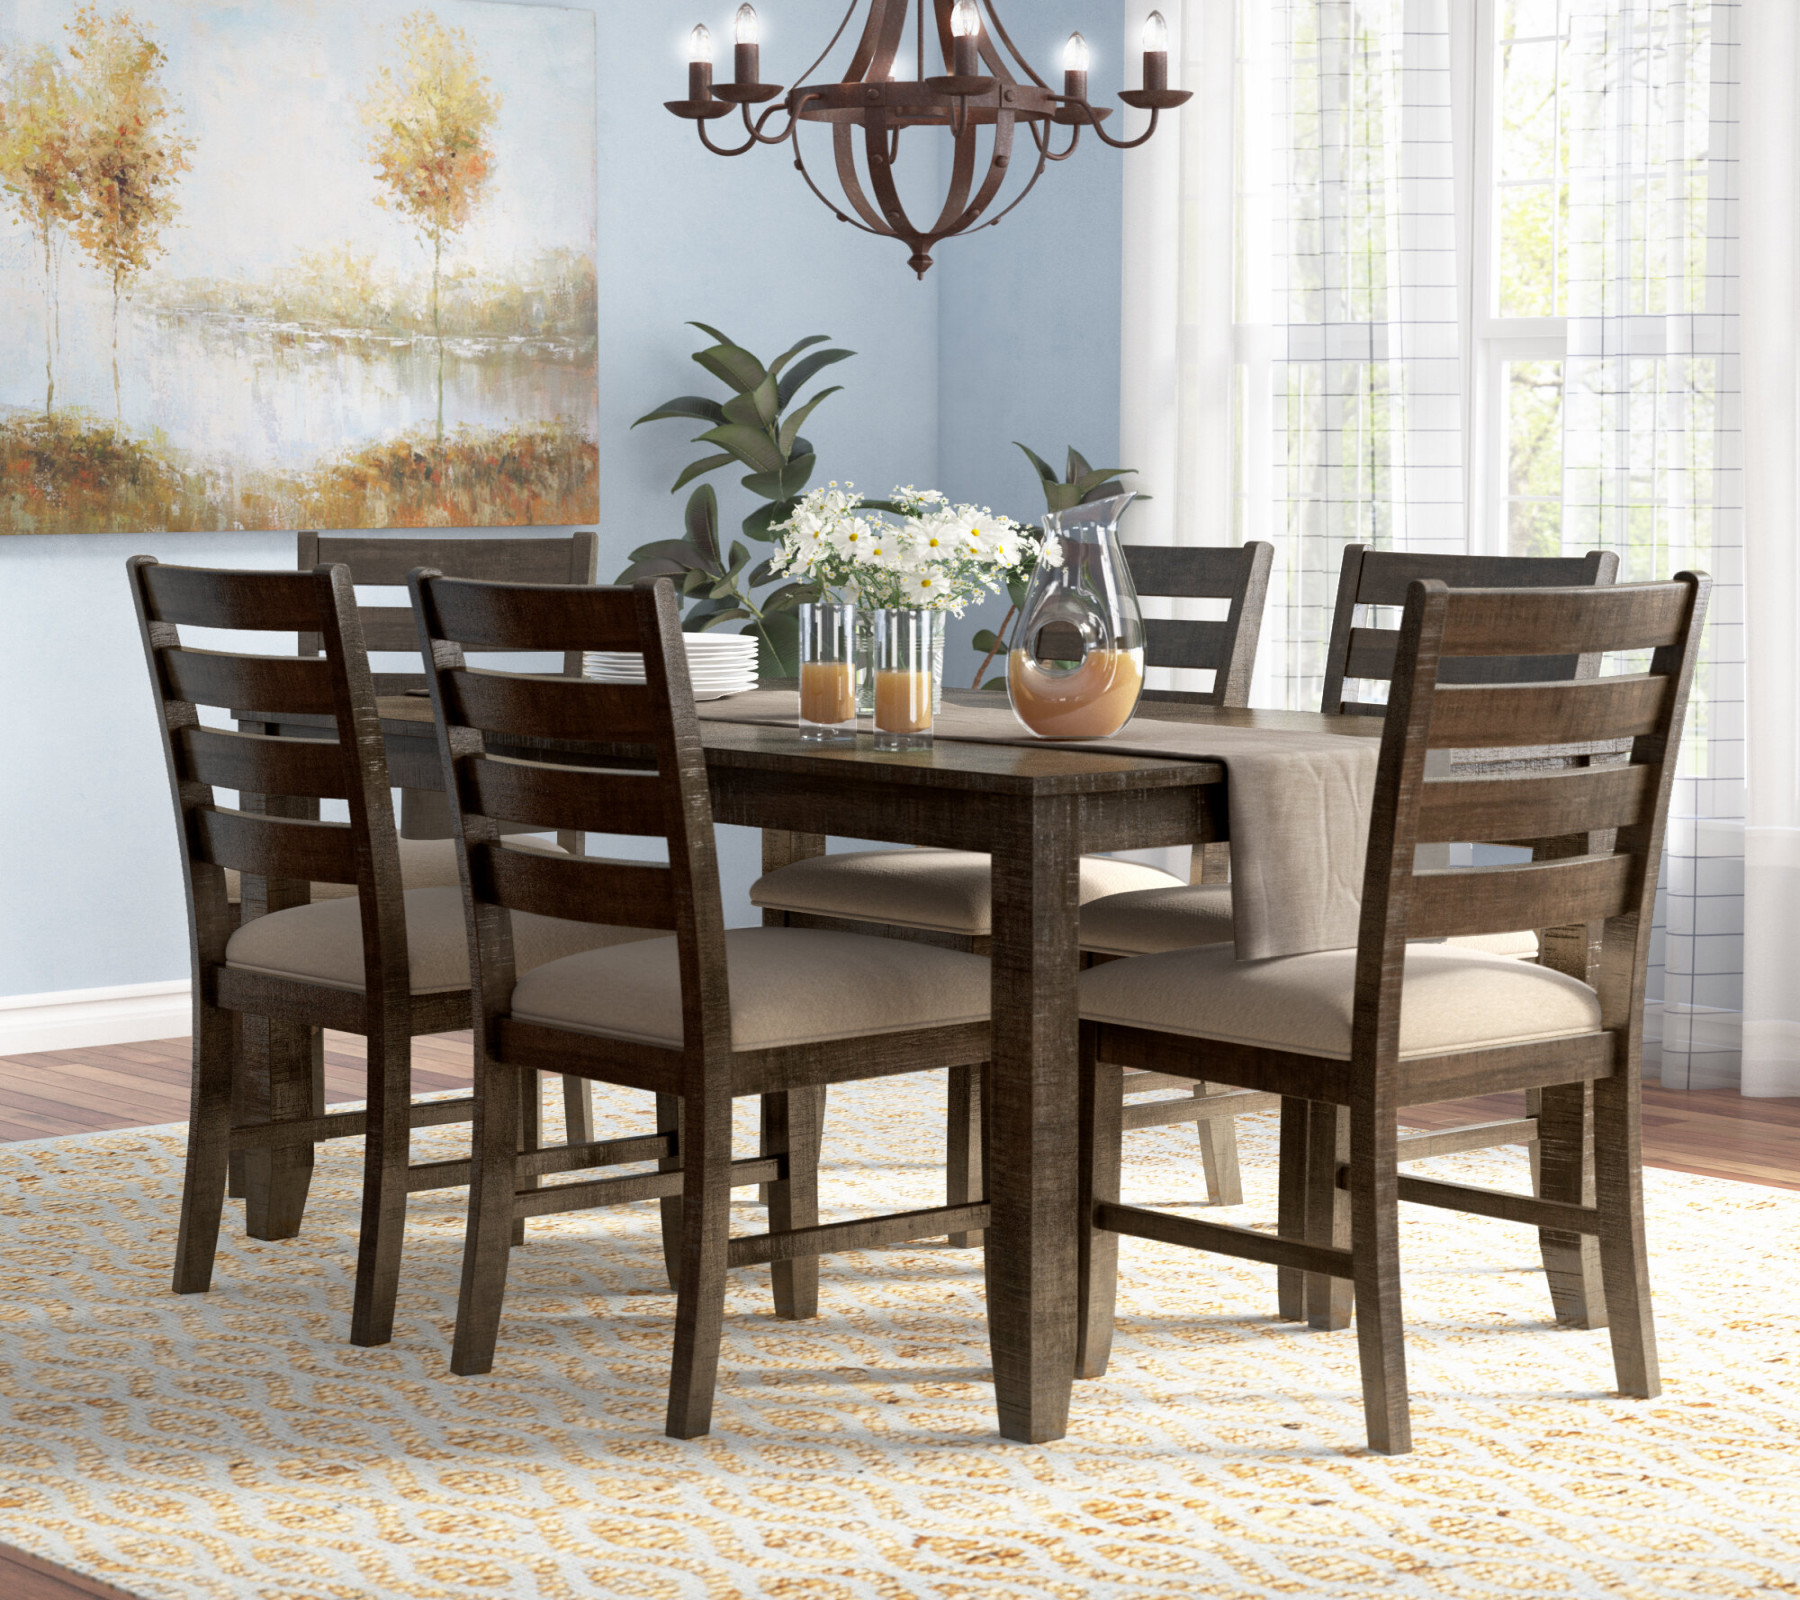 Wayfair  Seats  Kitchen & Dining Room Sets You